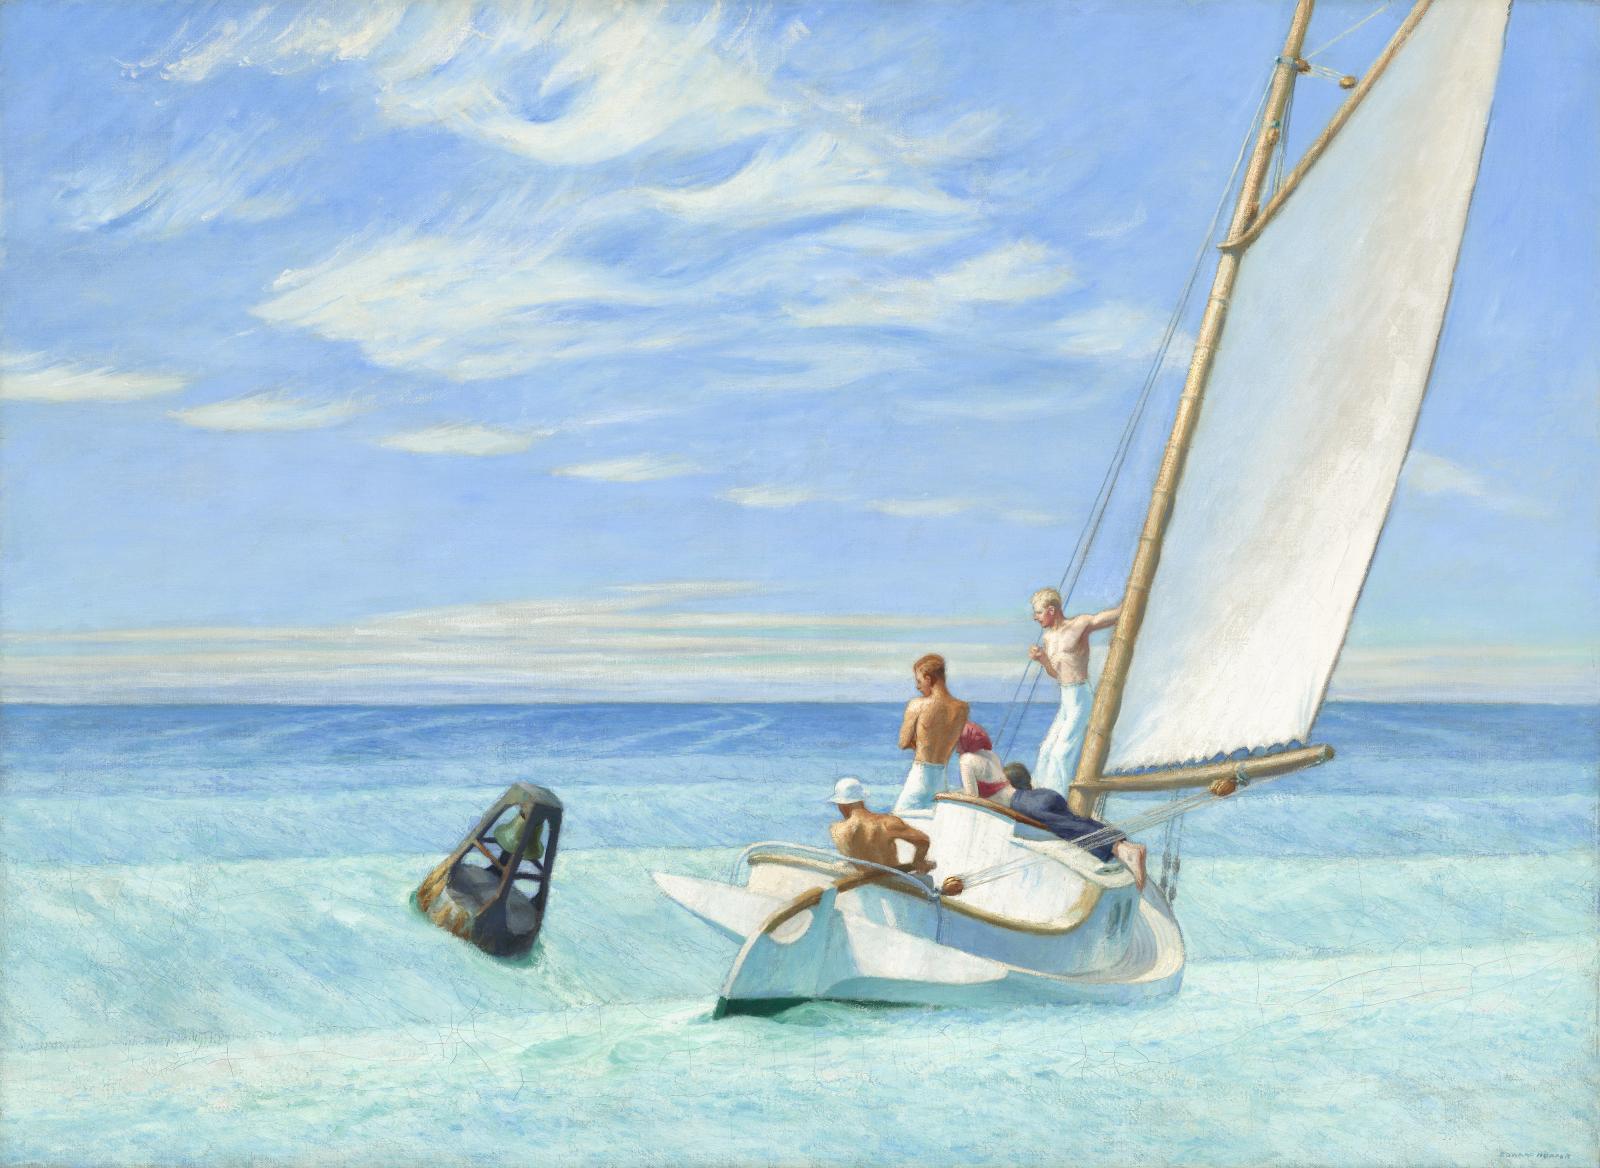 Edward Hopper (1882-1967), Ground Swell, 1939, Corcoran Collection (Museum Purchase, William A. Clark Fund).